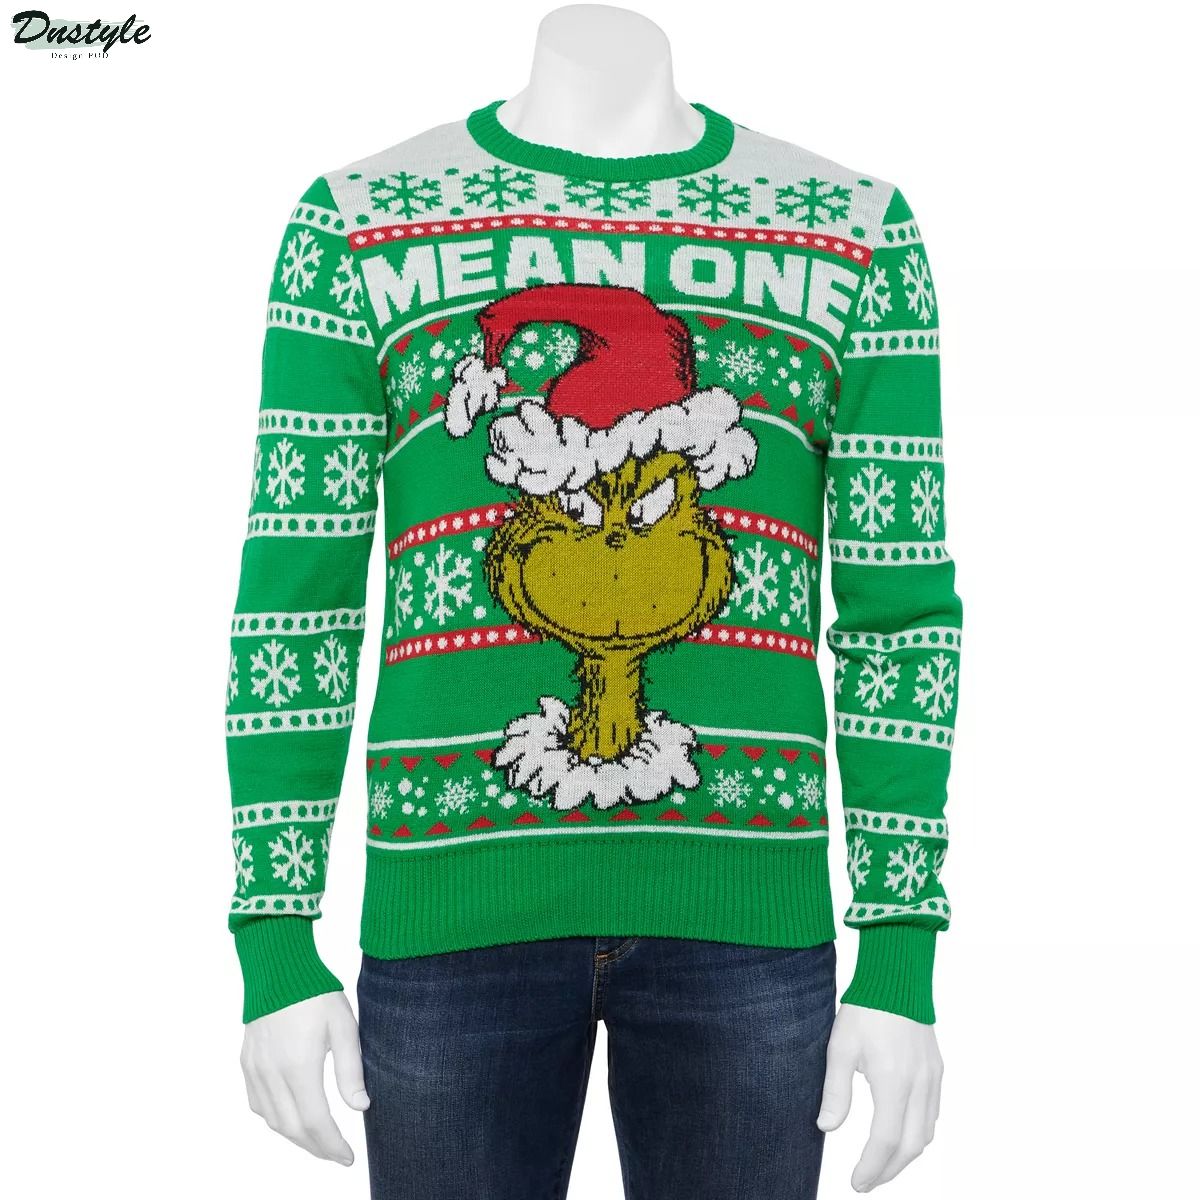 The Grinch mean one ugly christmas sweater